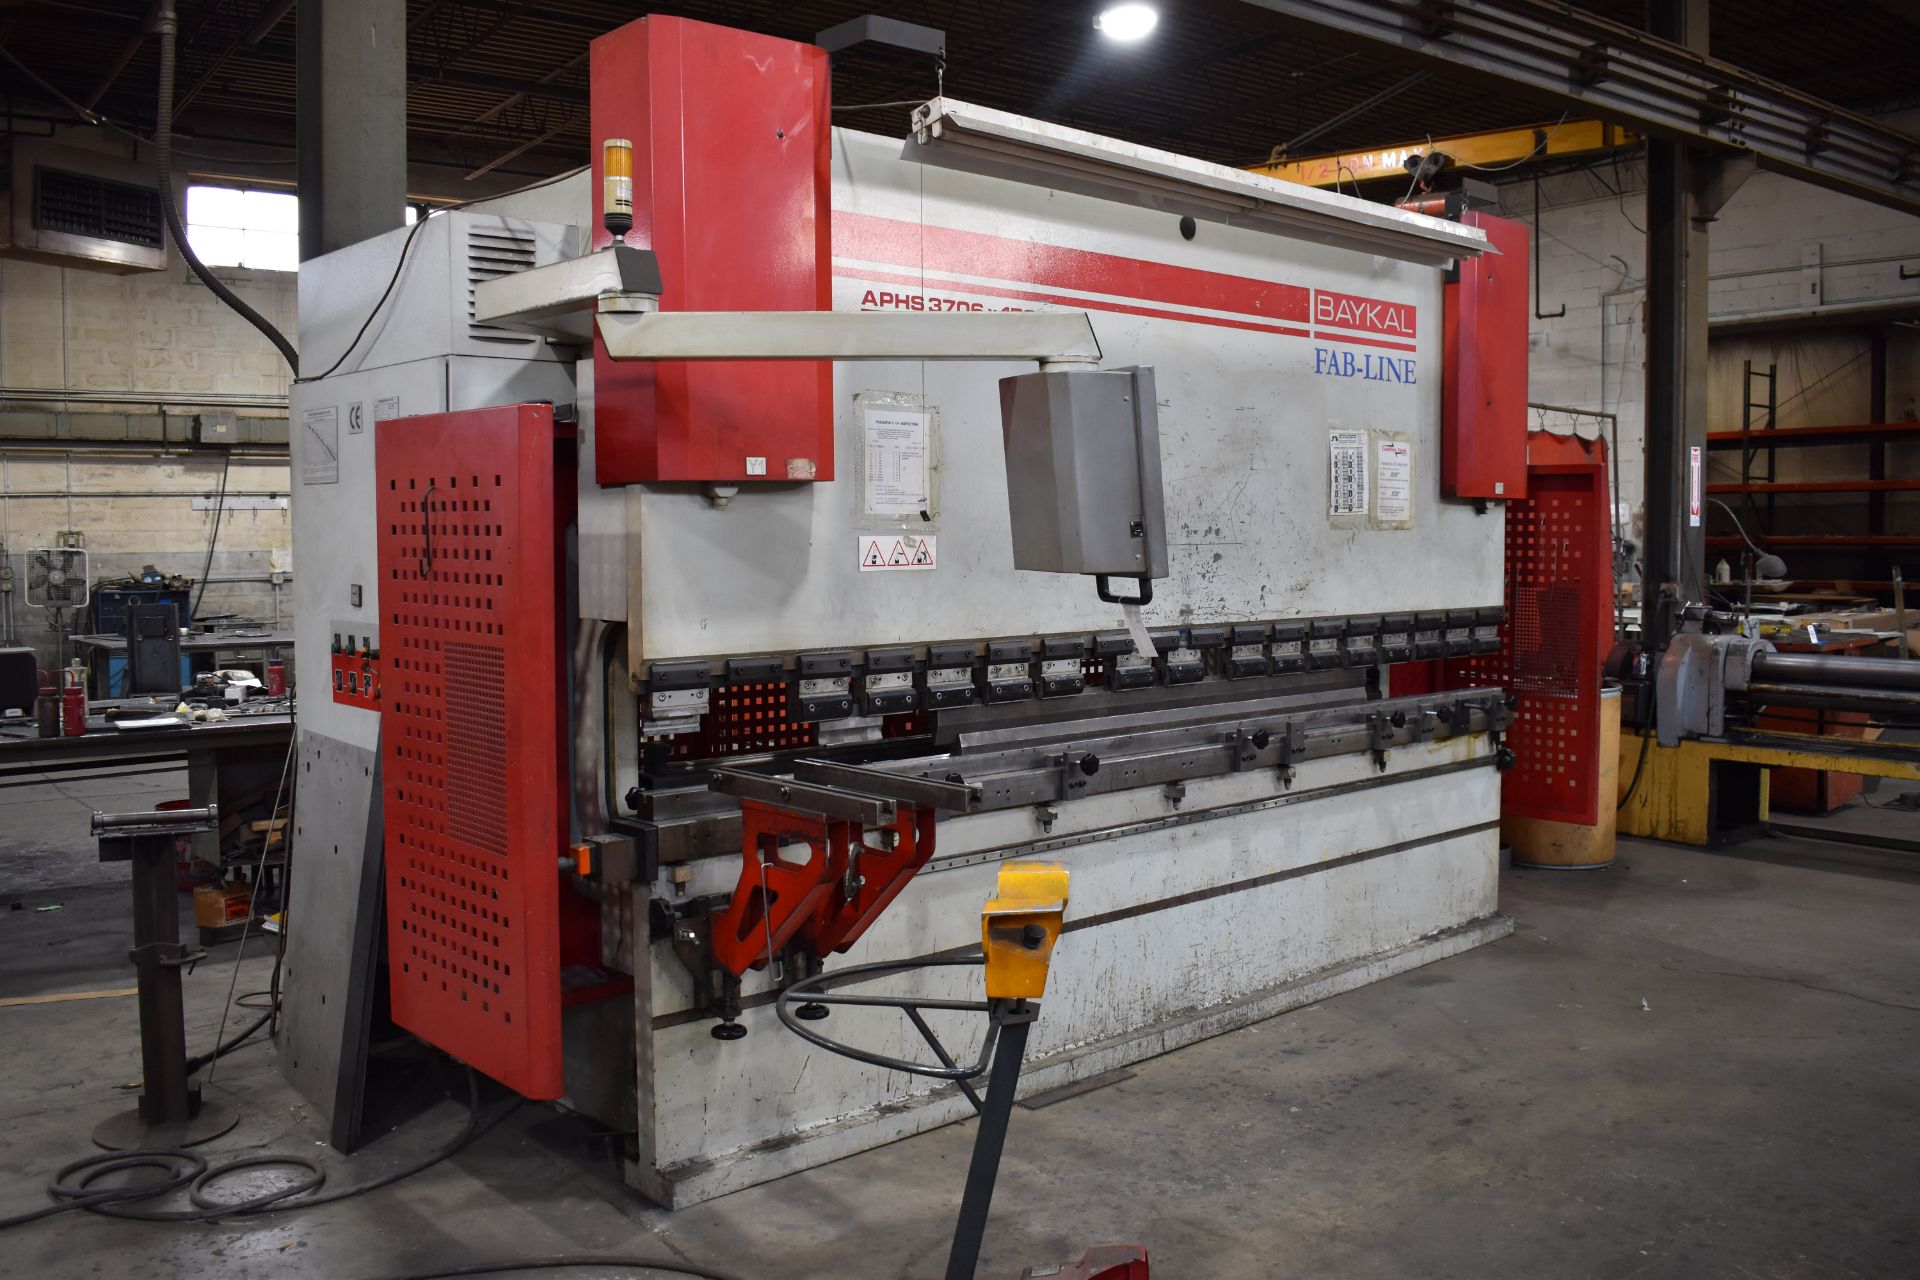 Baykal Fab-Line 12 ft. x 150 Ton Model APHS3706+150 Compact CNC Hydraulic Press Brake, S/N 11835 ( - Image 5 of 10